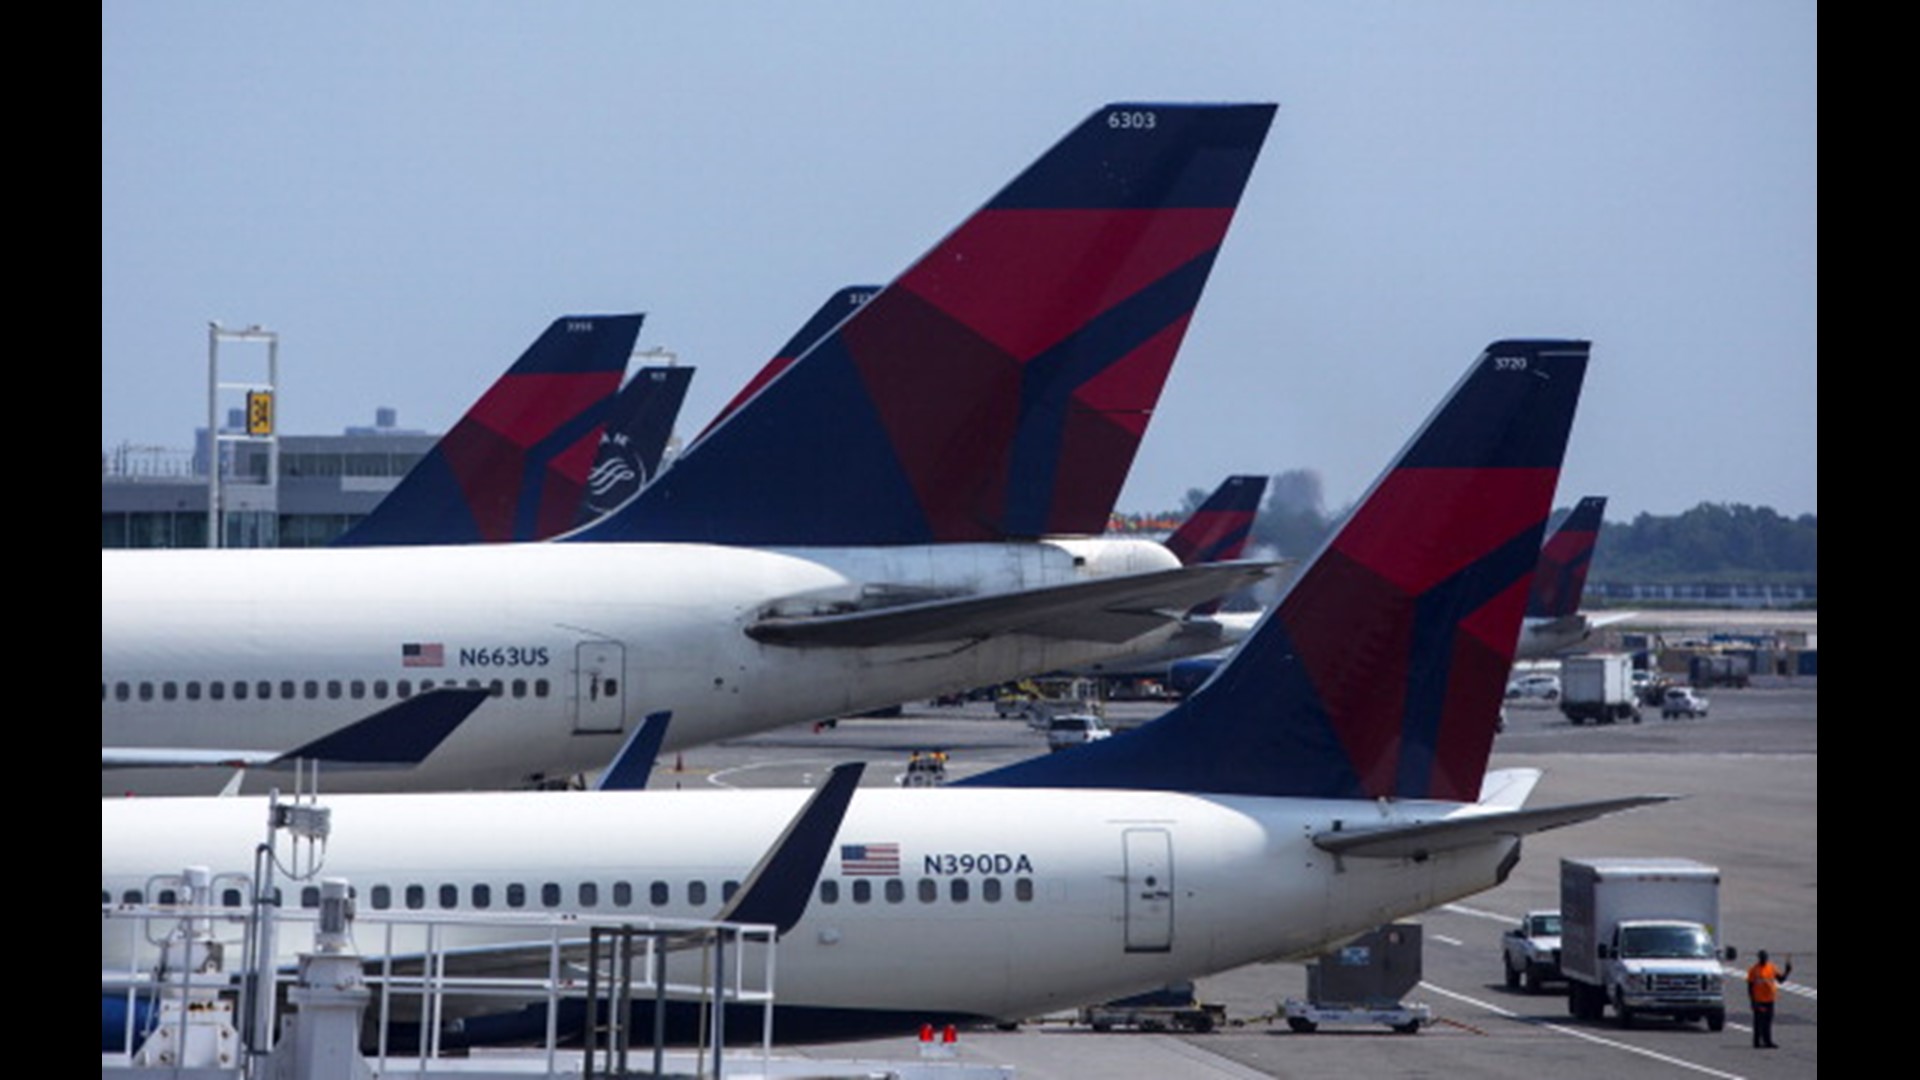 Samantha Mott, a Sacramento International Airport spokesperson, told ABC10 a passenger died on a Delta flight to Seattle. It is not known how they died.